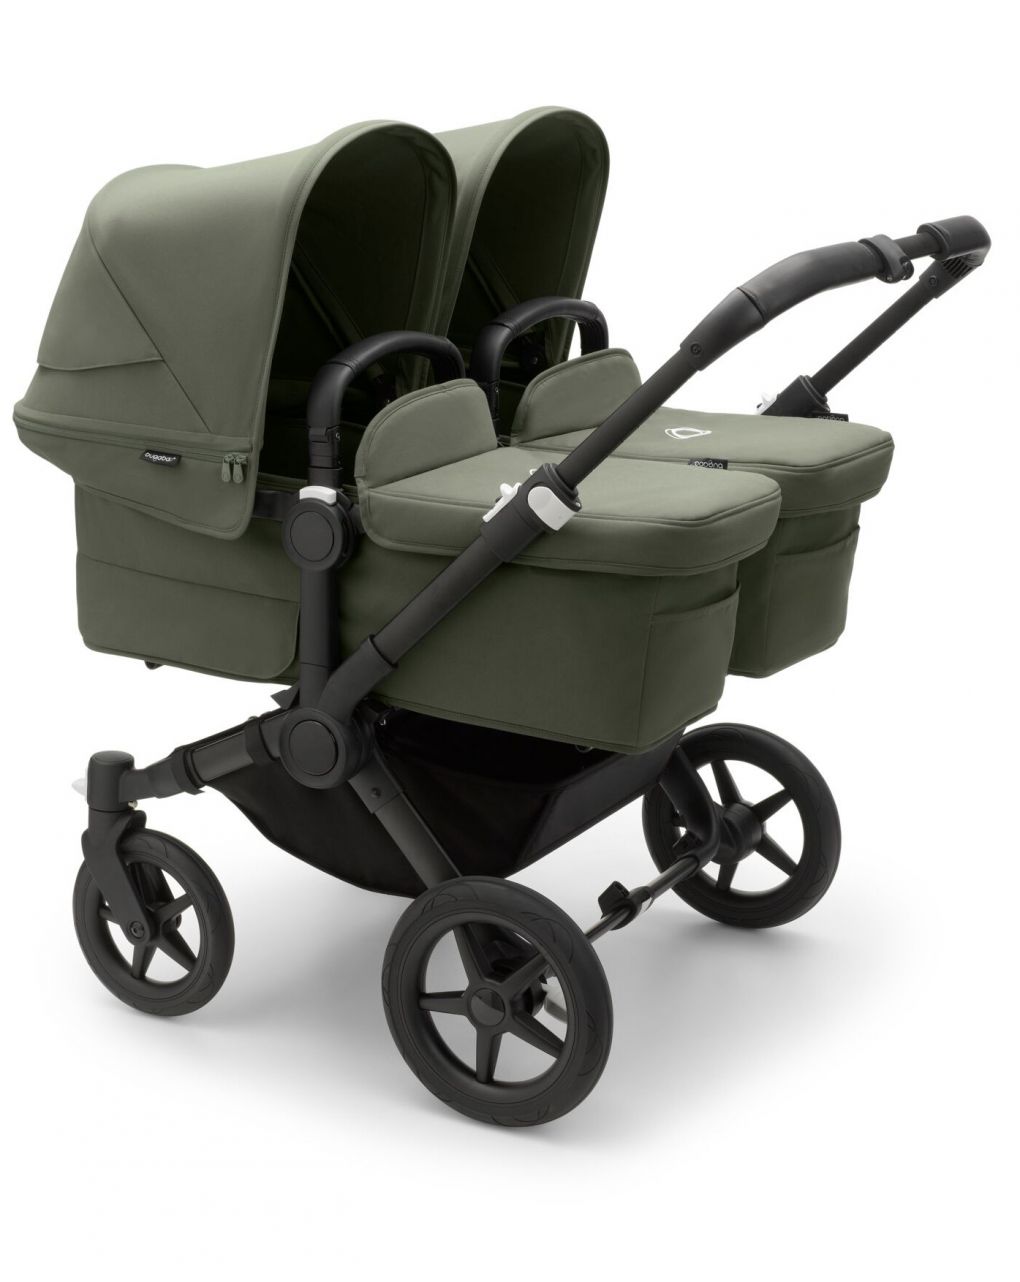 Bugaboo donkey 5 twin carrycot and stroller black frame, tecidos e forest green canopy - Bugaboo